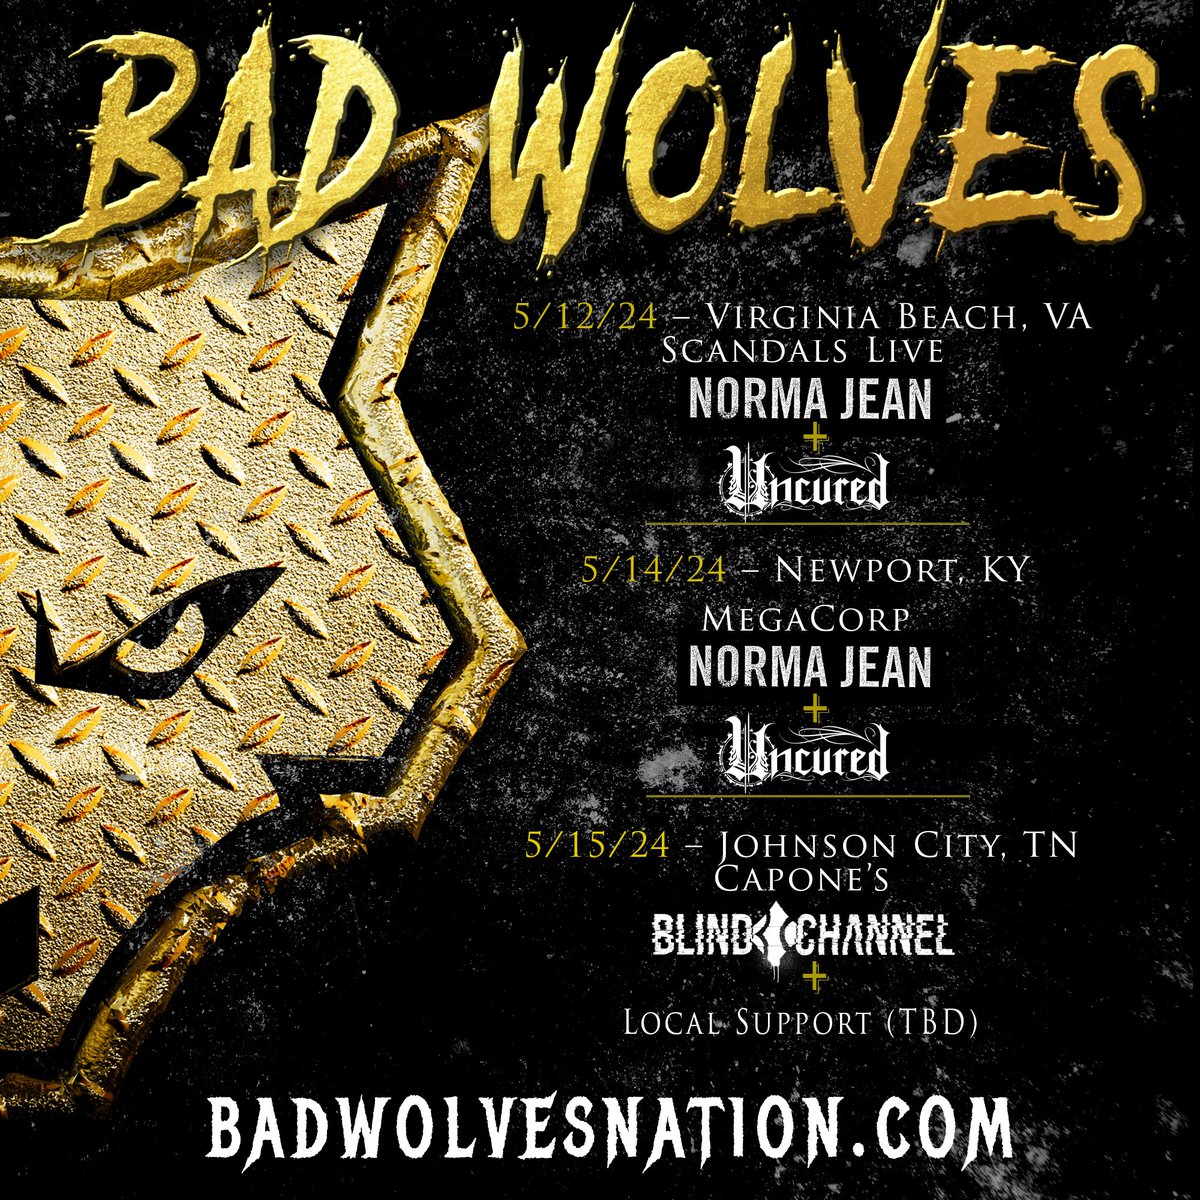 🚨VIRGINIA🚨KENTUCKY🚨TENNESSEE🚨 Support has been announced! Catch us with @NormaJeanBand @uncuredband 5/12 & 5/14 and @BlindChannelFIN + Local Support (TBD) 5/15 🎫 Get your tickets now! 🔗 Badwolvesnation.com